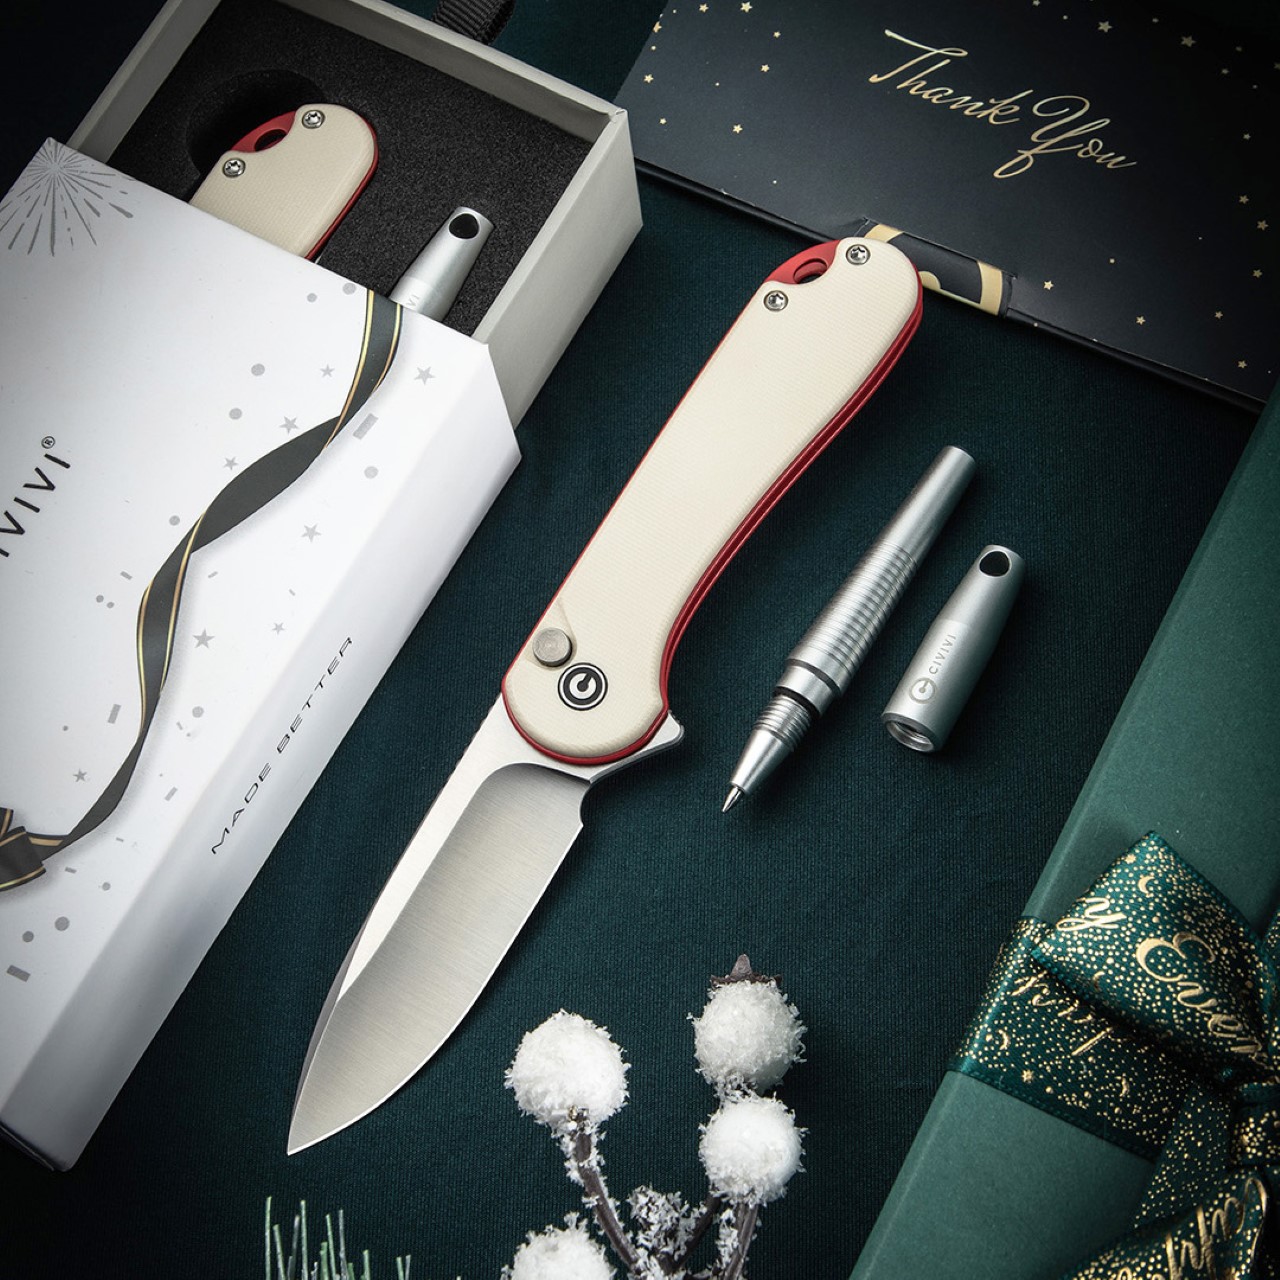 https://www.yankodesign.com/images/design_news/2023/12/top-10-edc-knives-to-gift-by-civivi-to-enhance-your-outdoor-adventures/CIVIVI_weknife_Gifts_EDC-Knives_4.jpg